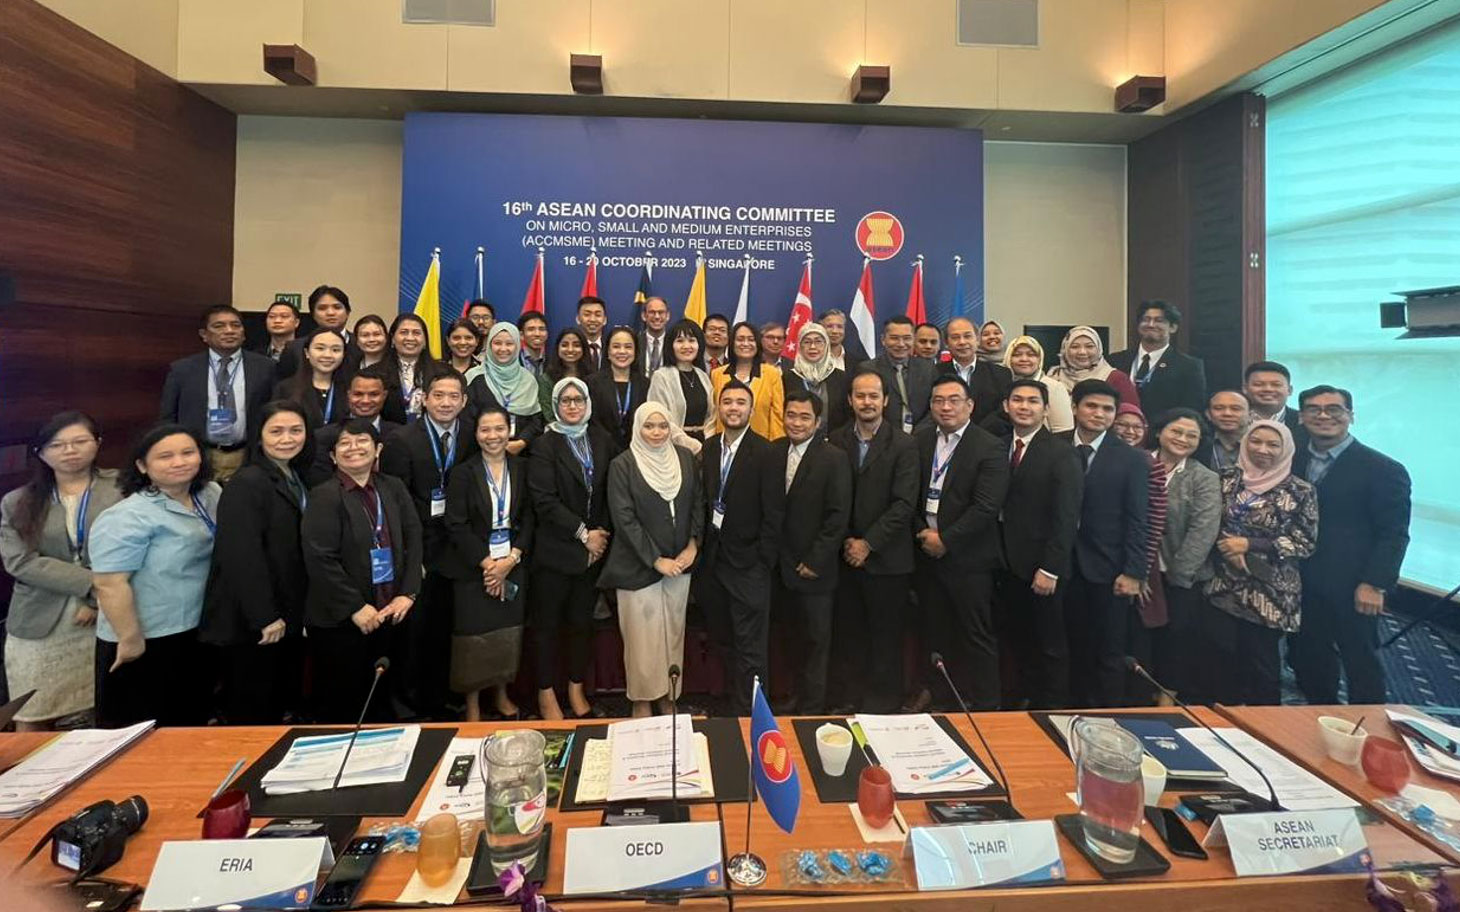 Group photo of ASEAN Member States Representatives during the 16th ACCMSME Meeting and other Meetings.